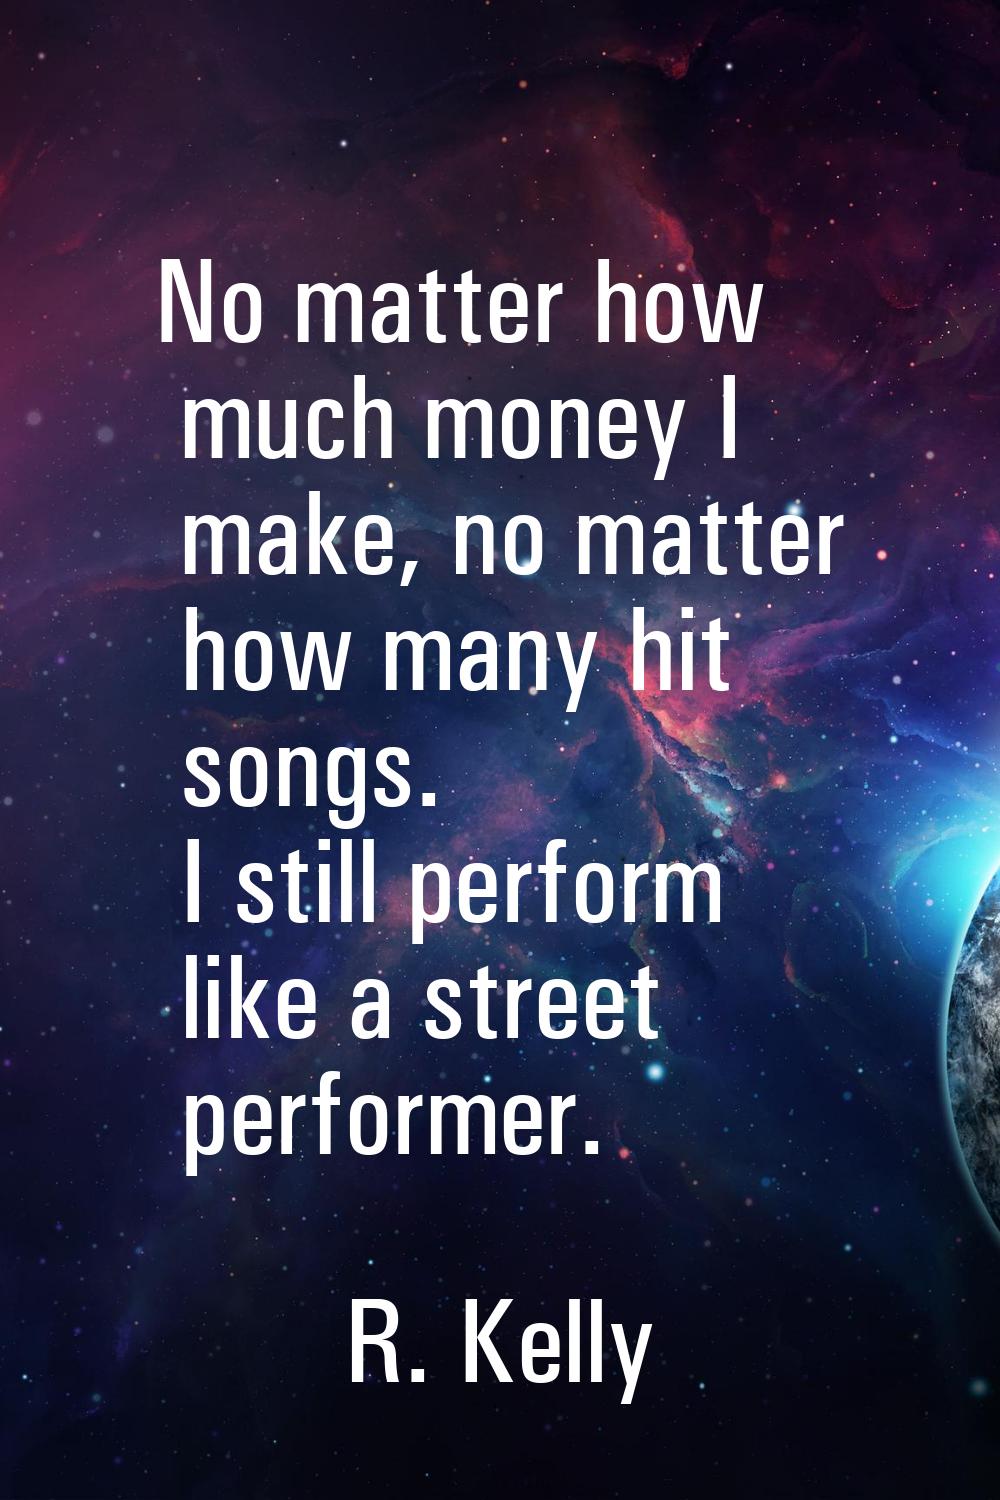 No matter how much money I make, no matter how many hit songs. I still perform like a street perfor